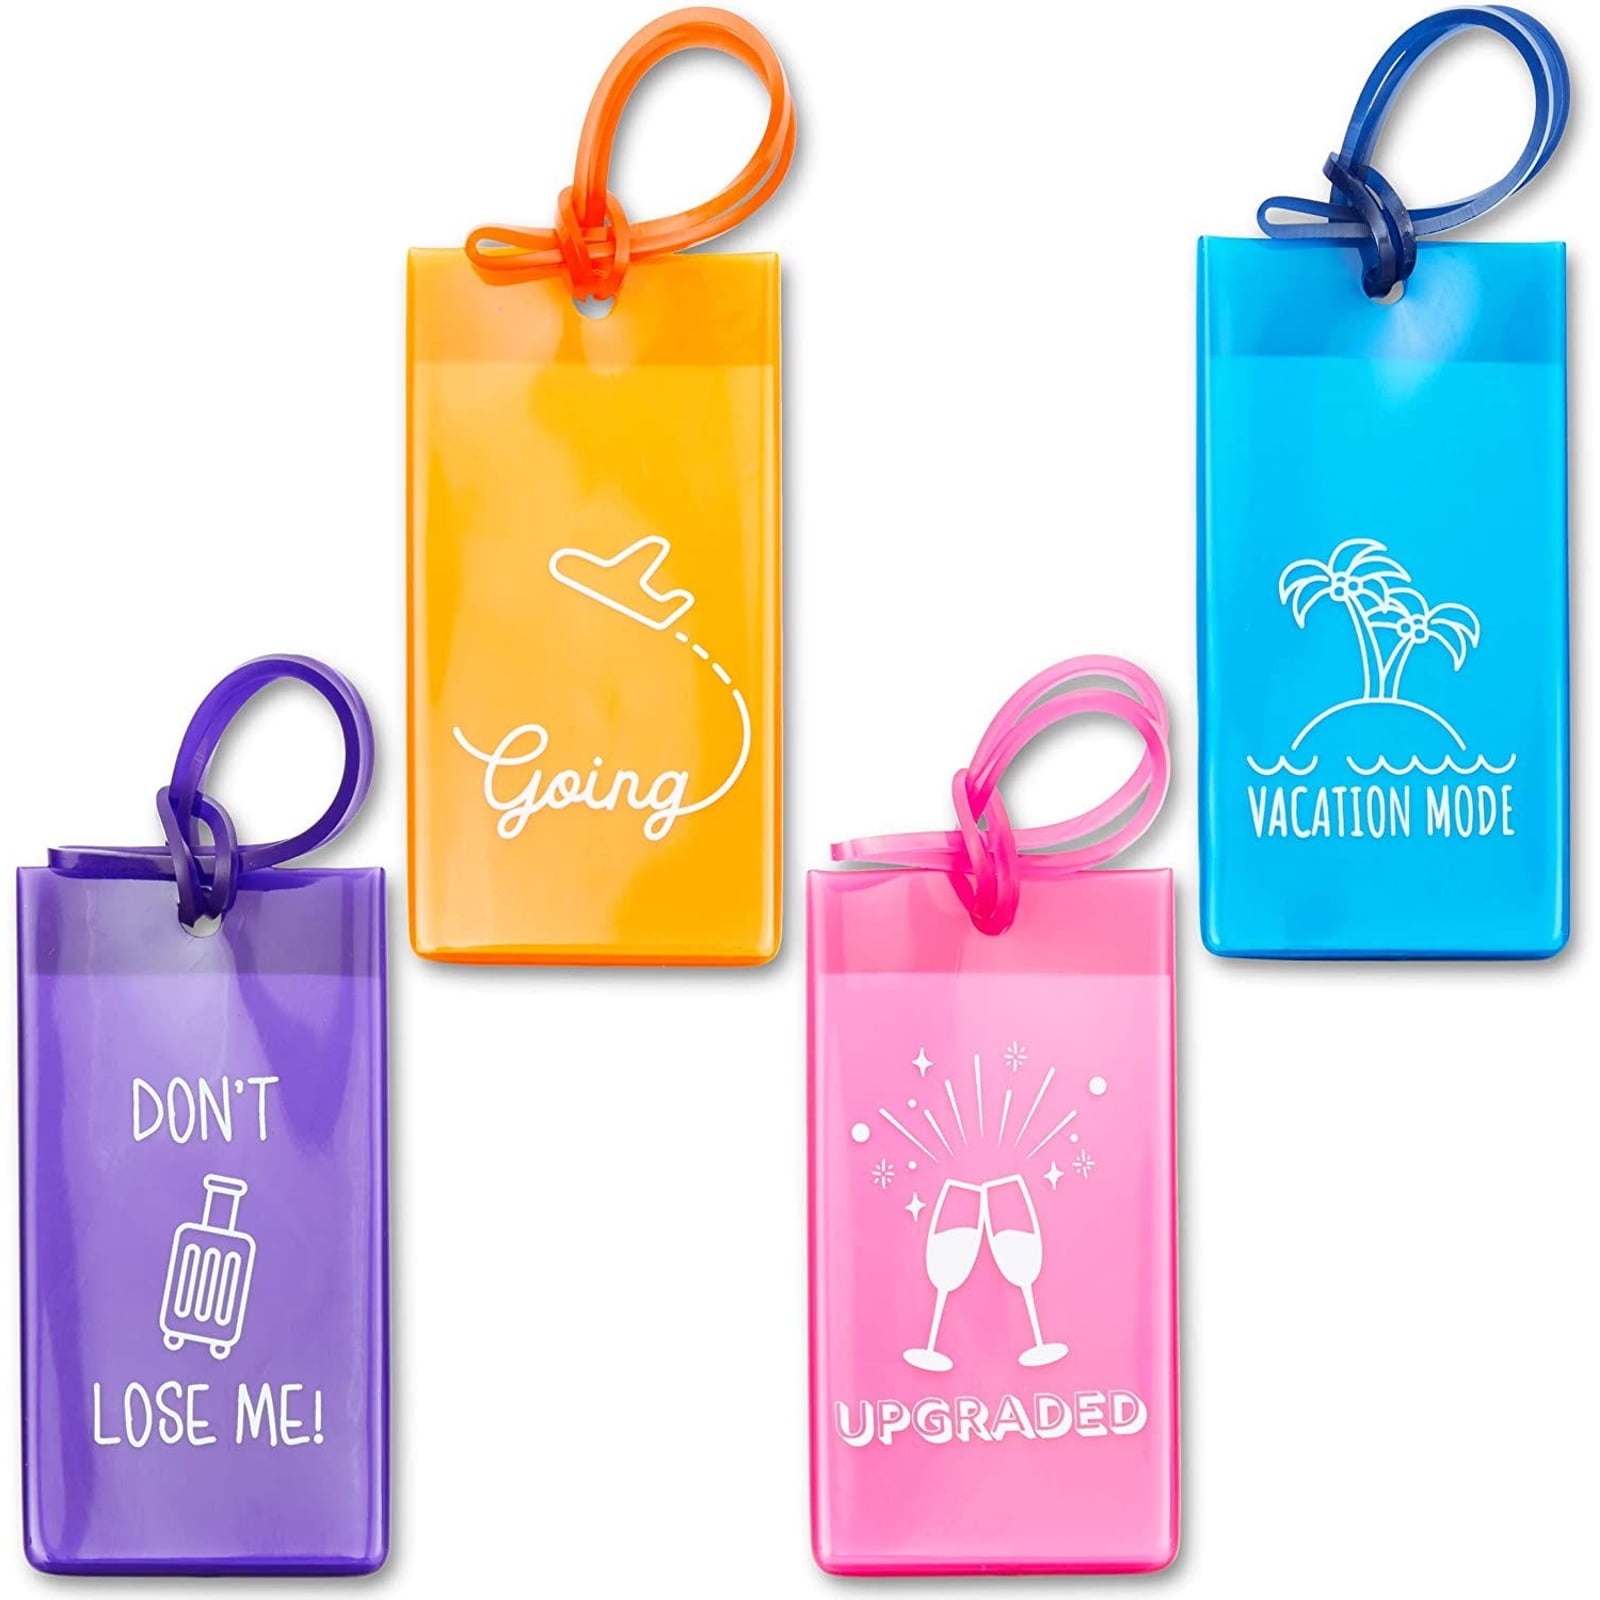 6 Designs Sewing Themed 3D Luggage Tag Set of 2 